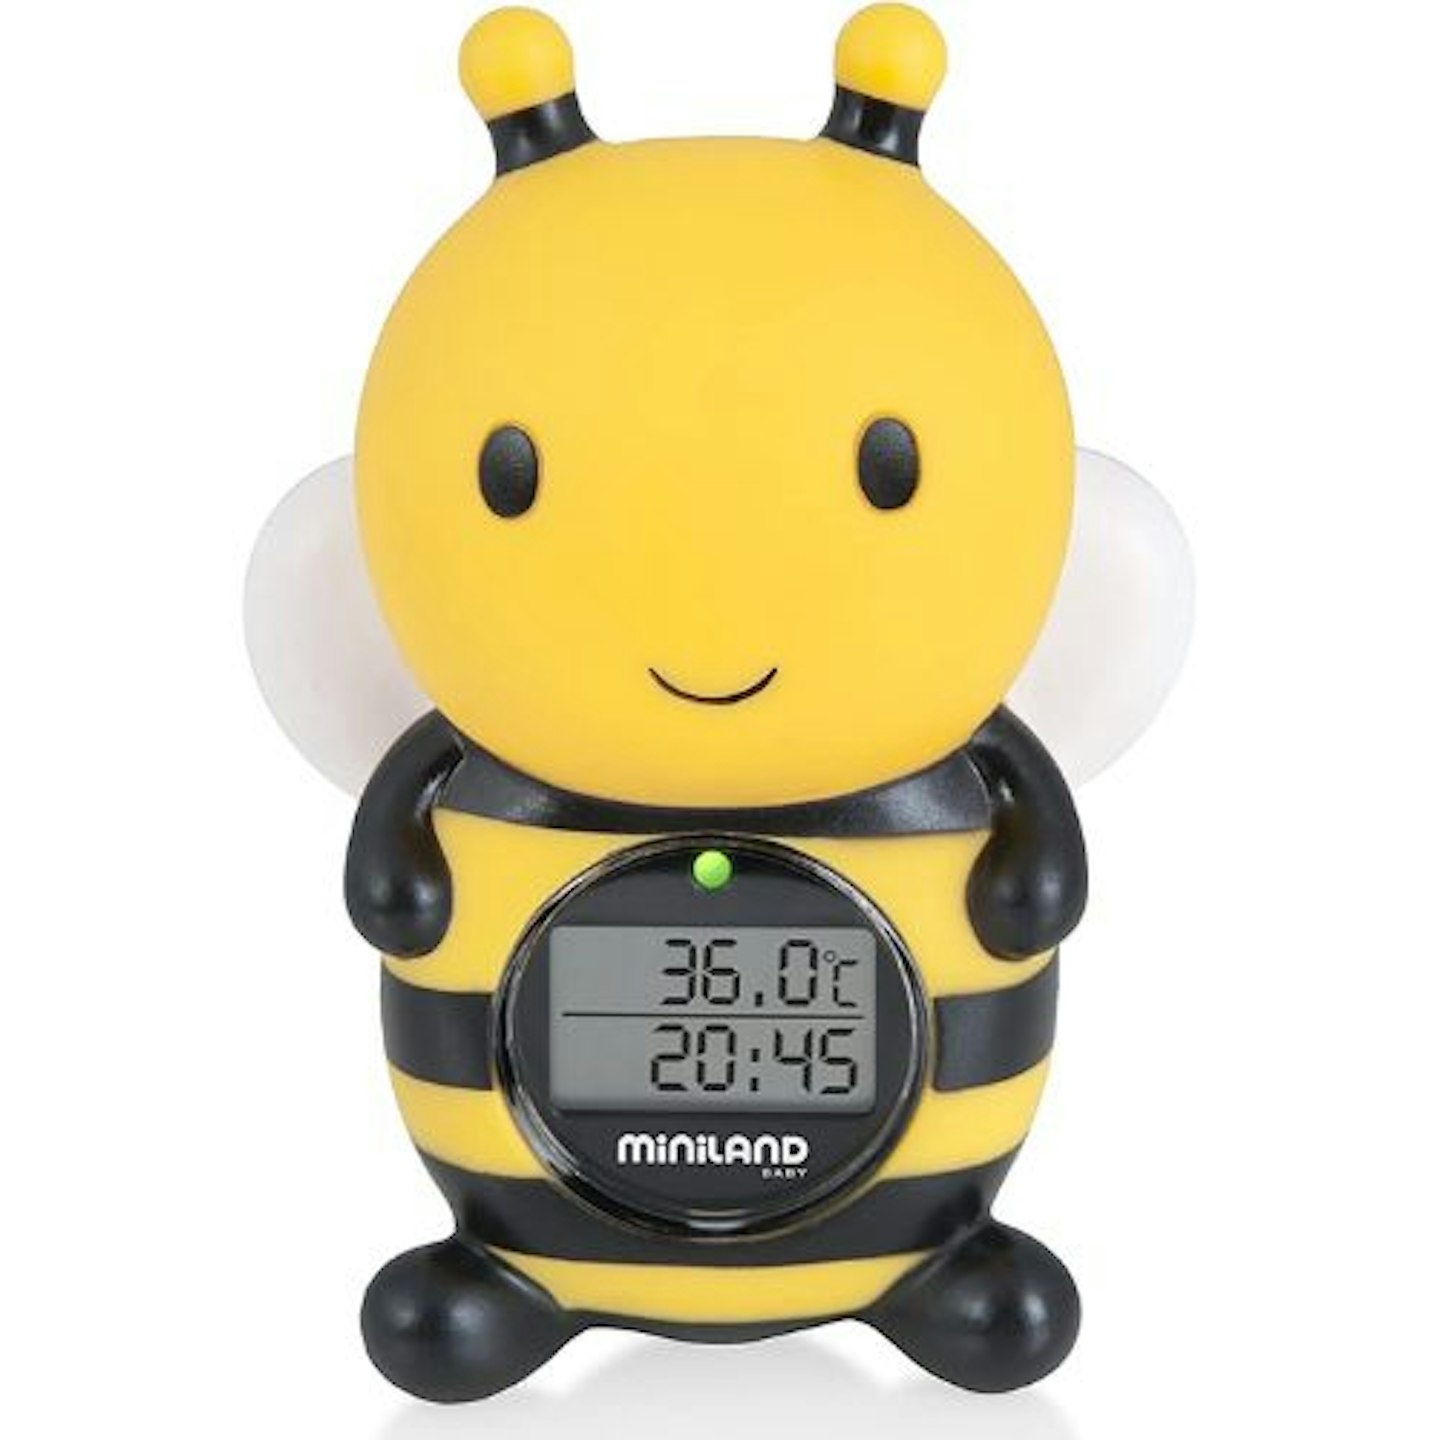 https://images.bauerhosting.com/affiliates/sites/12/motherandbaby/2022/08/Miniland-Bee-Shaped-Bath-and-Environmental-Thermometer.jpg?auto=format&w=1440&q=80